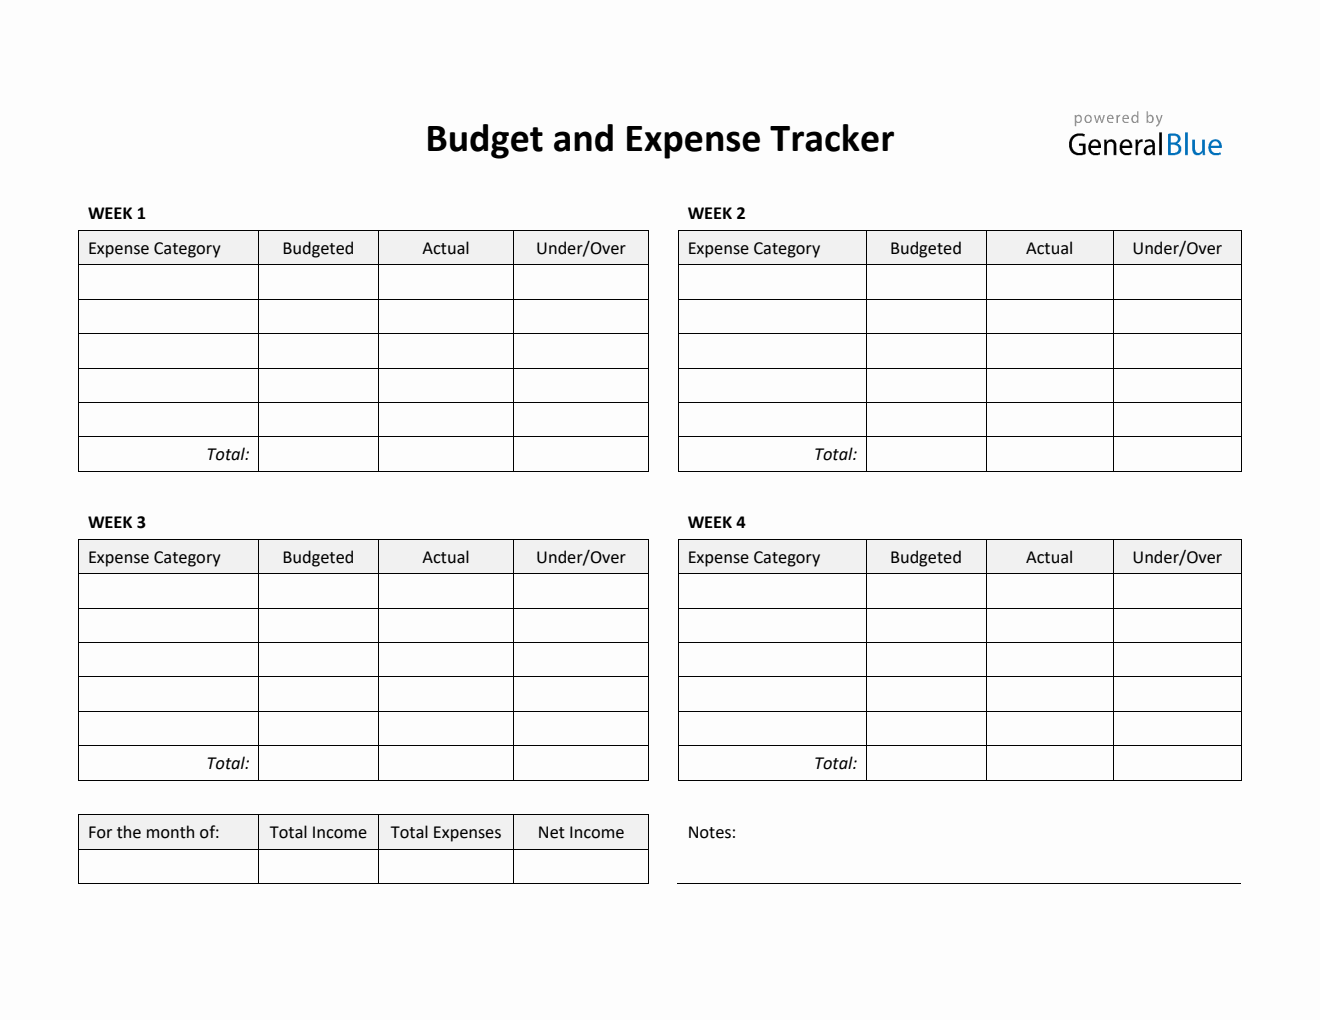 Budget and Expense Tracker in Word (Printable)